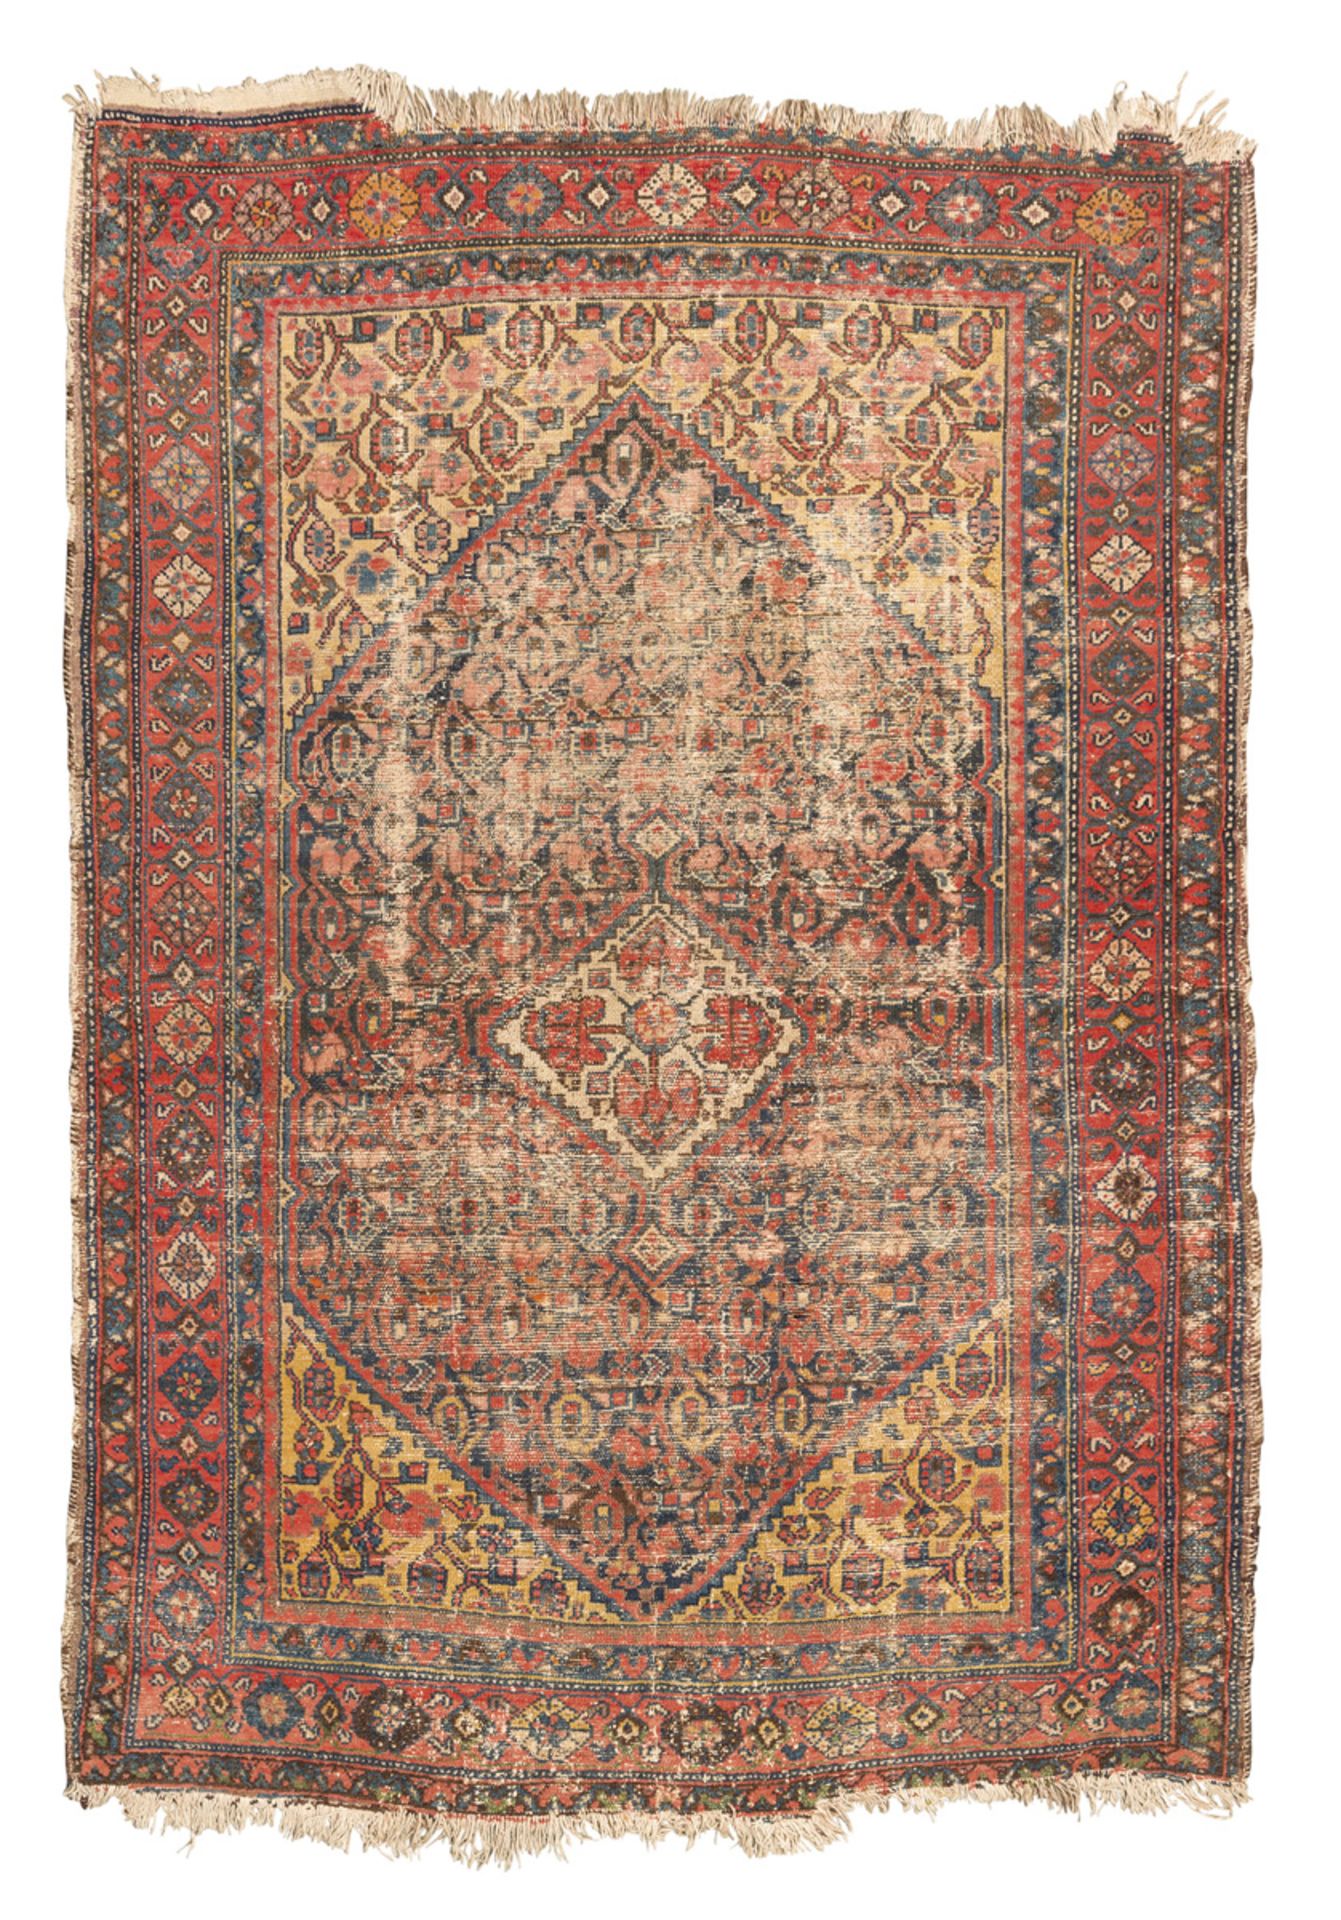 REMAINS OF MALAYER CARPET EARLY 20TH CENTURY